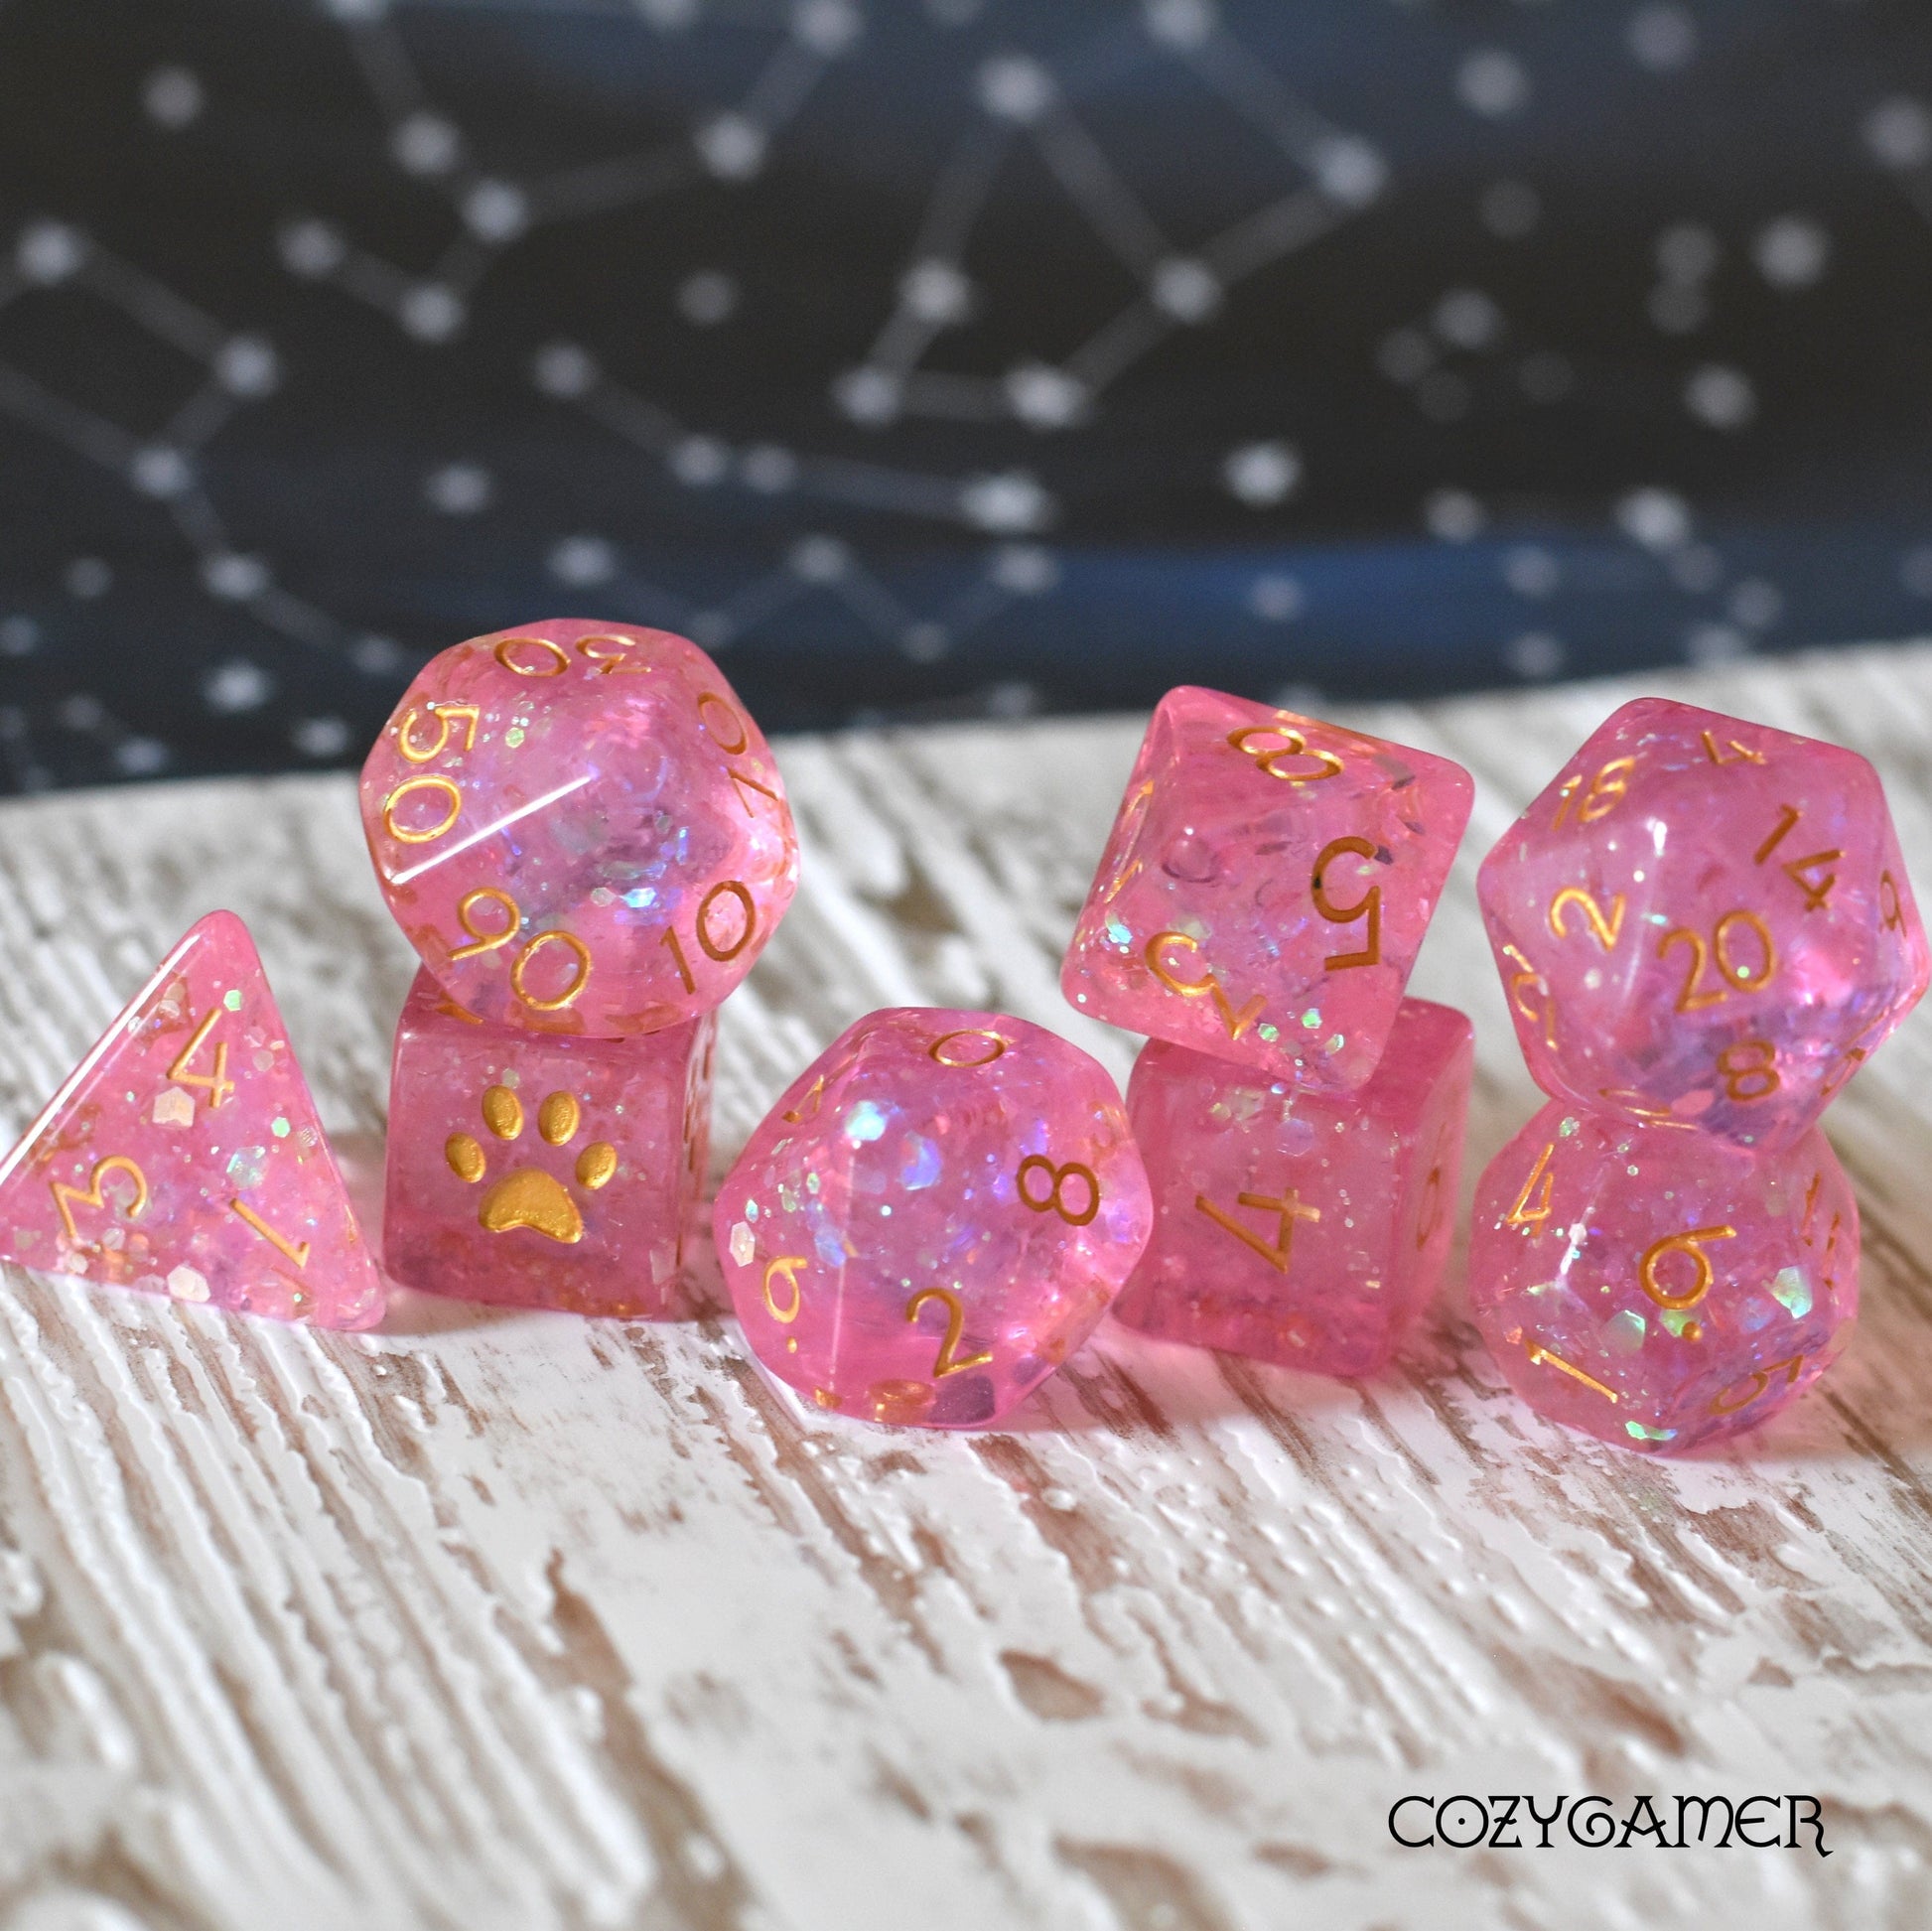 Fairy Sparkles 8 Piece Dice Set. Clear Pink Resin with Glitter